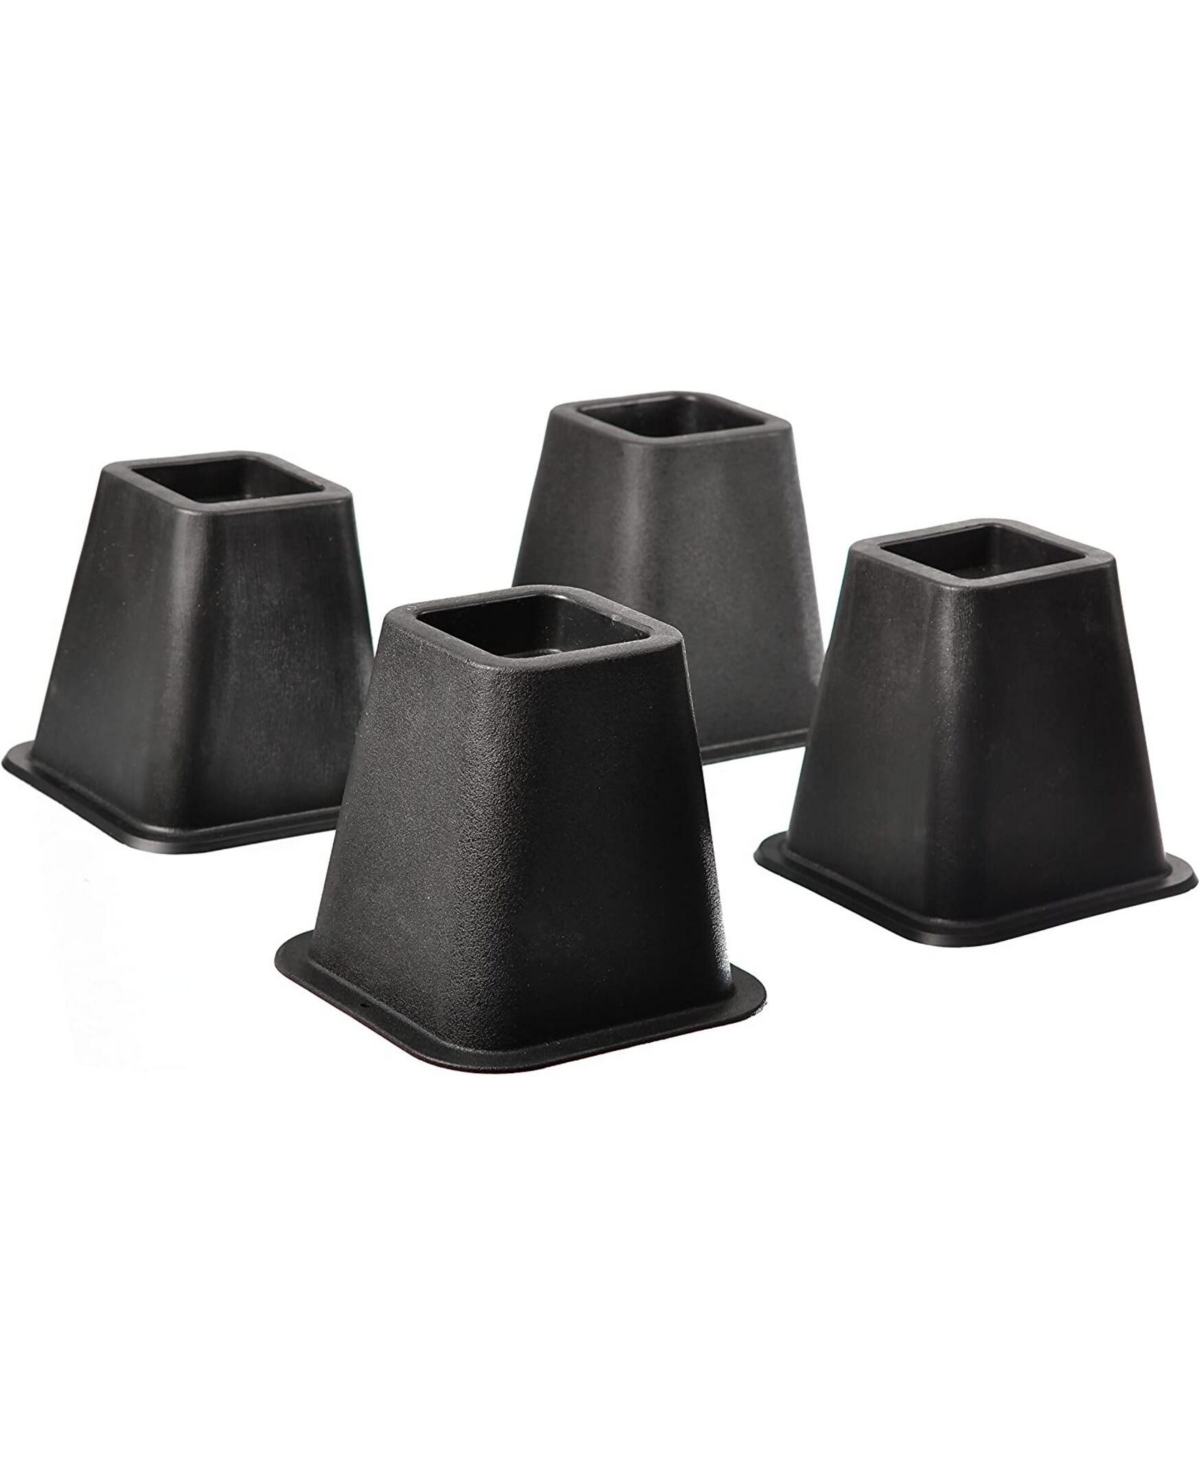 5 to 6-inch Super Quality Bed and Furniture Risers 4-pack in Black - Black